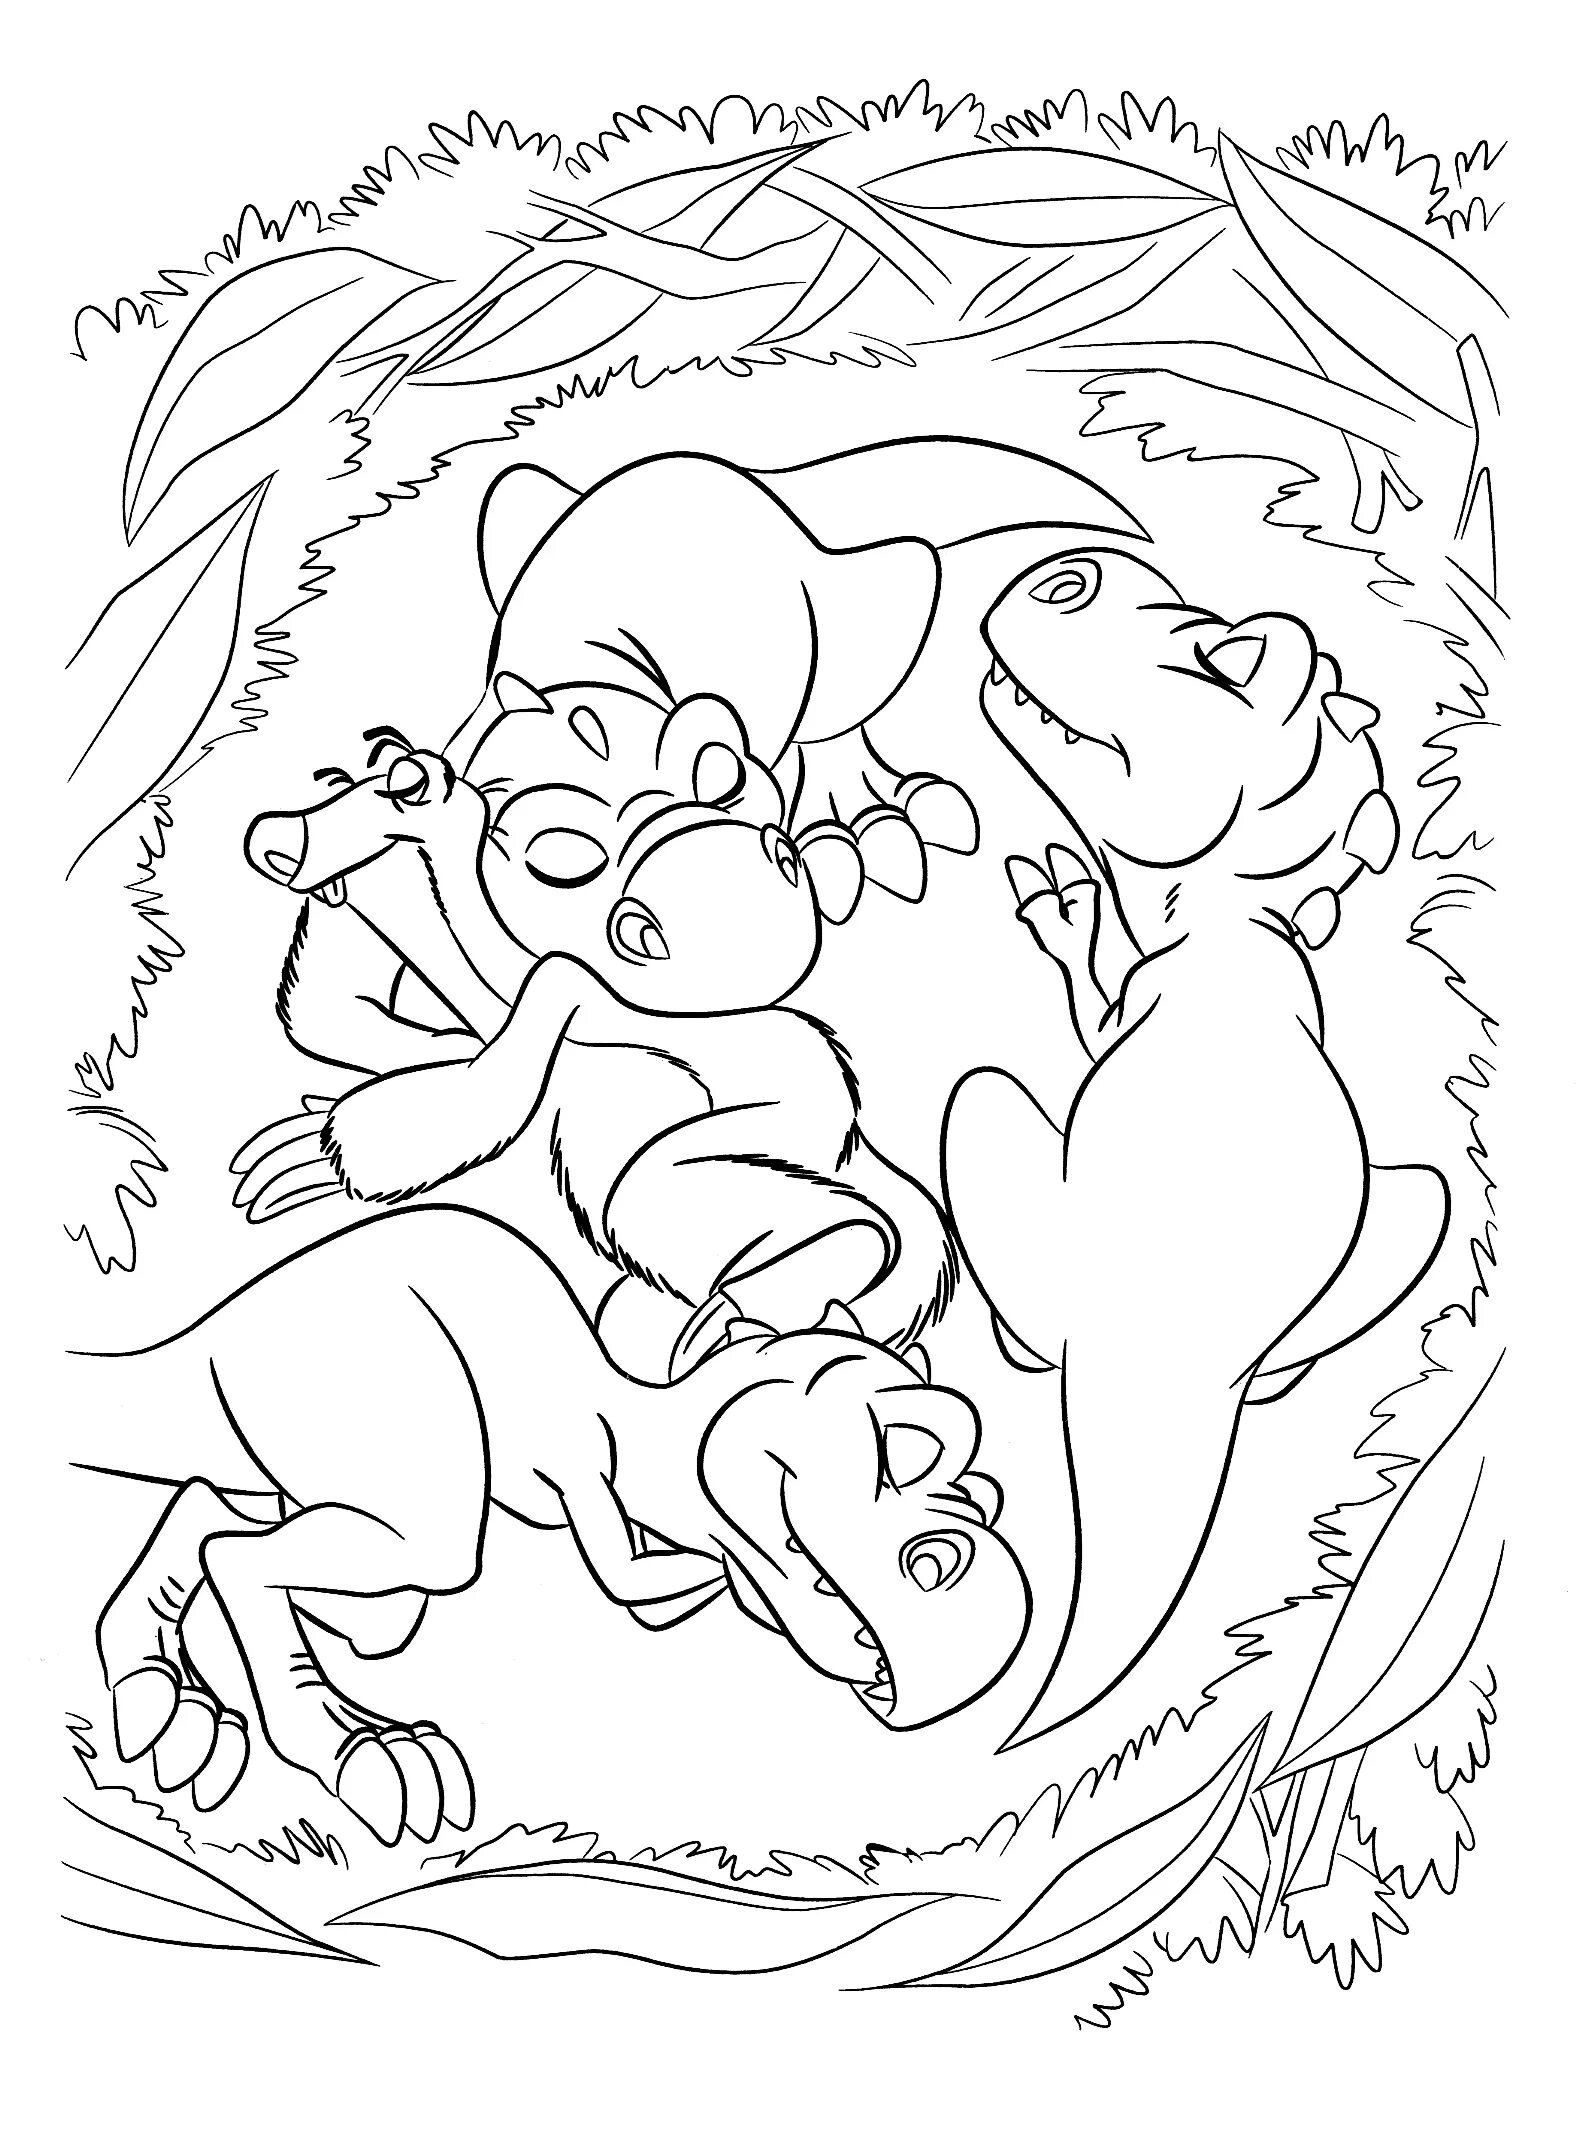 Regal ice age 3 coloring page